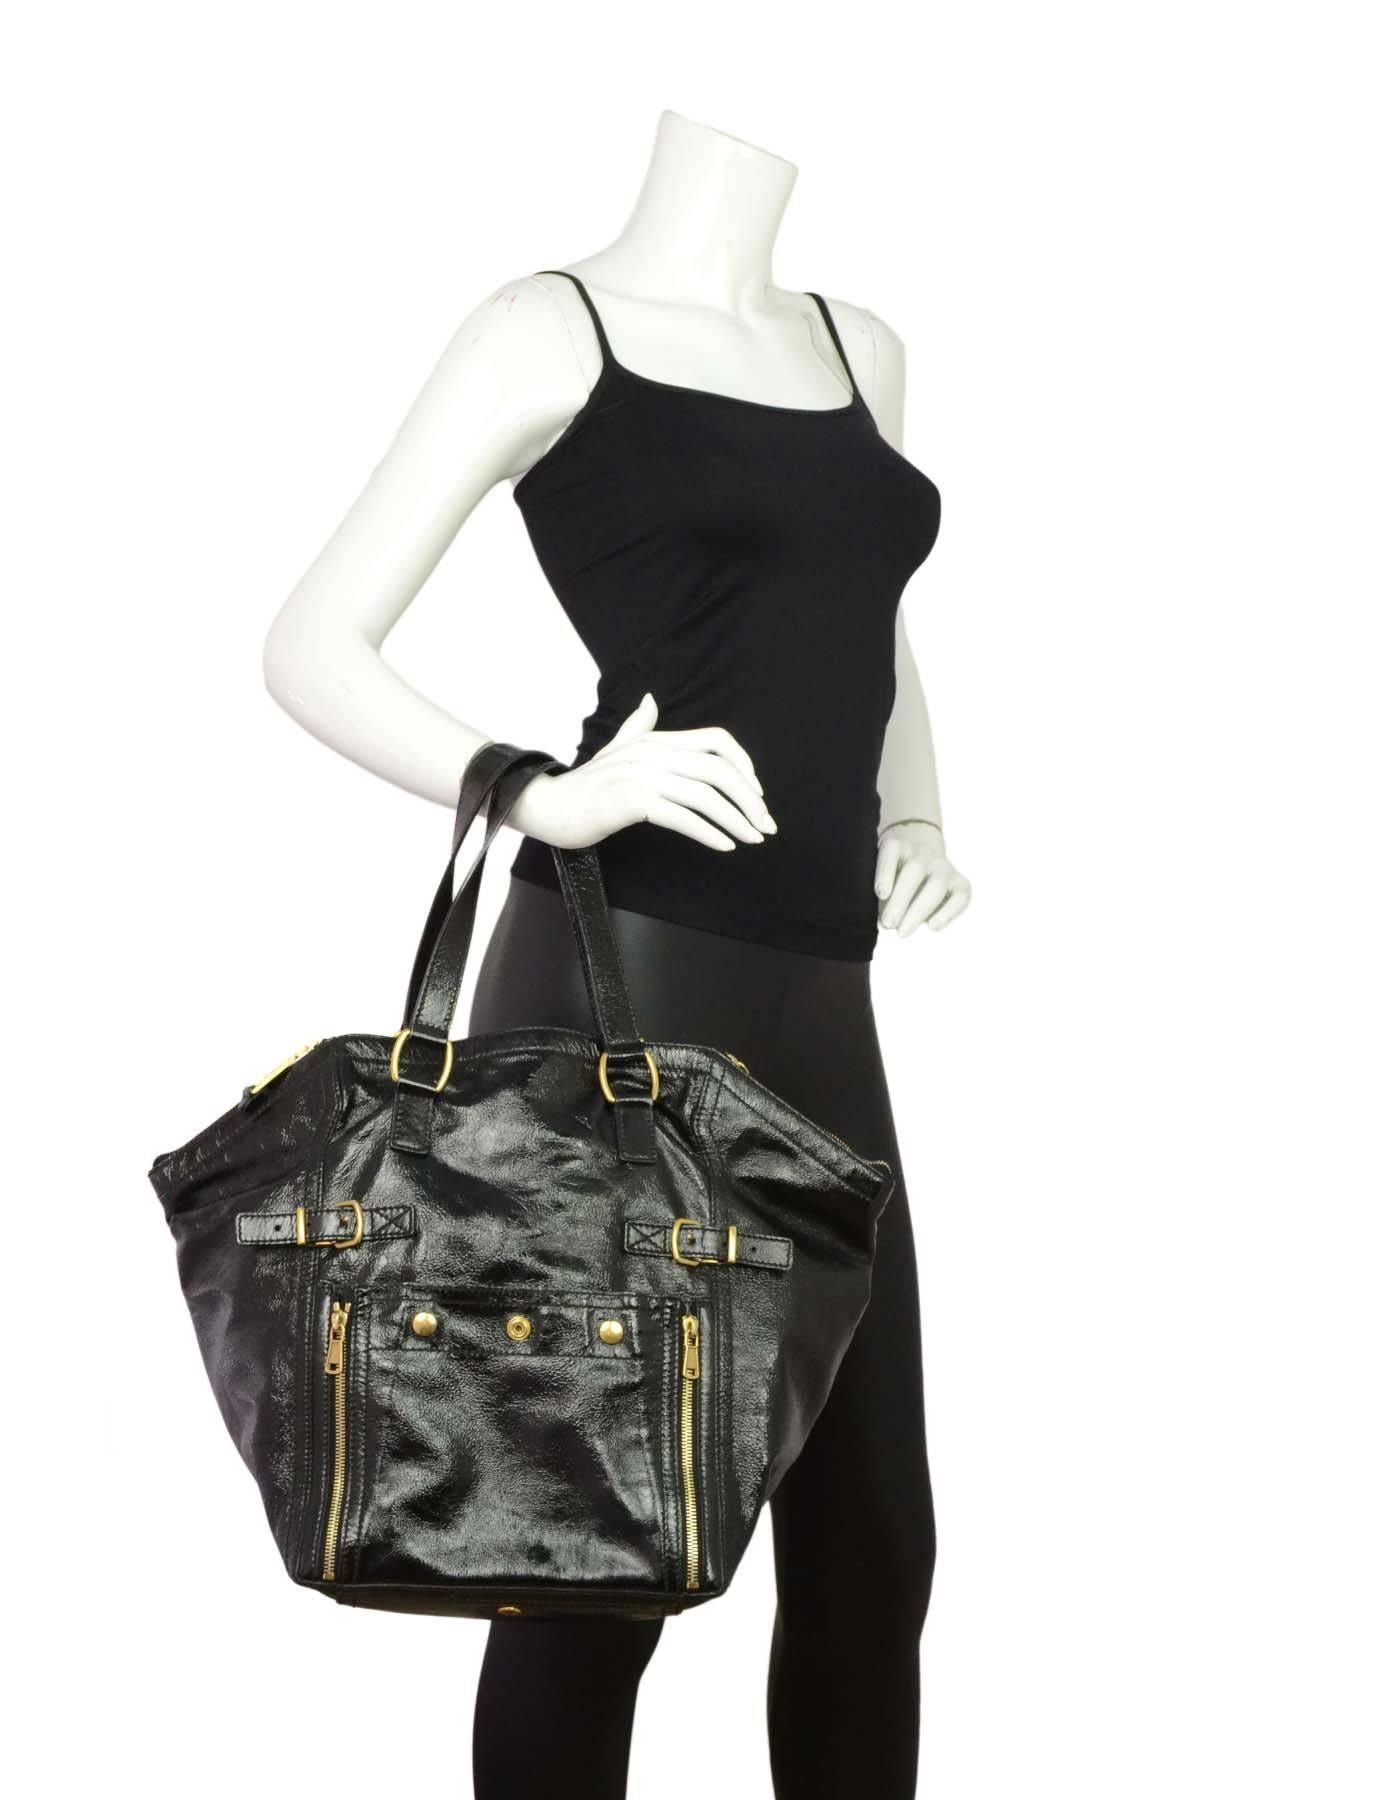 Yves Saint Laurent Black Patent Leather Large Downtown Tote

Made In: Italy
Color: Black
Hardware: Goldtone
Materials: Patent leather and metal
Lining: Black textile
Closure/Opening: Zip closure at sides and open in middle
Exterior Pockets: